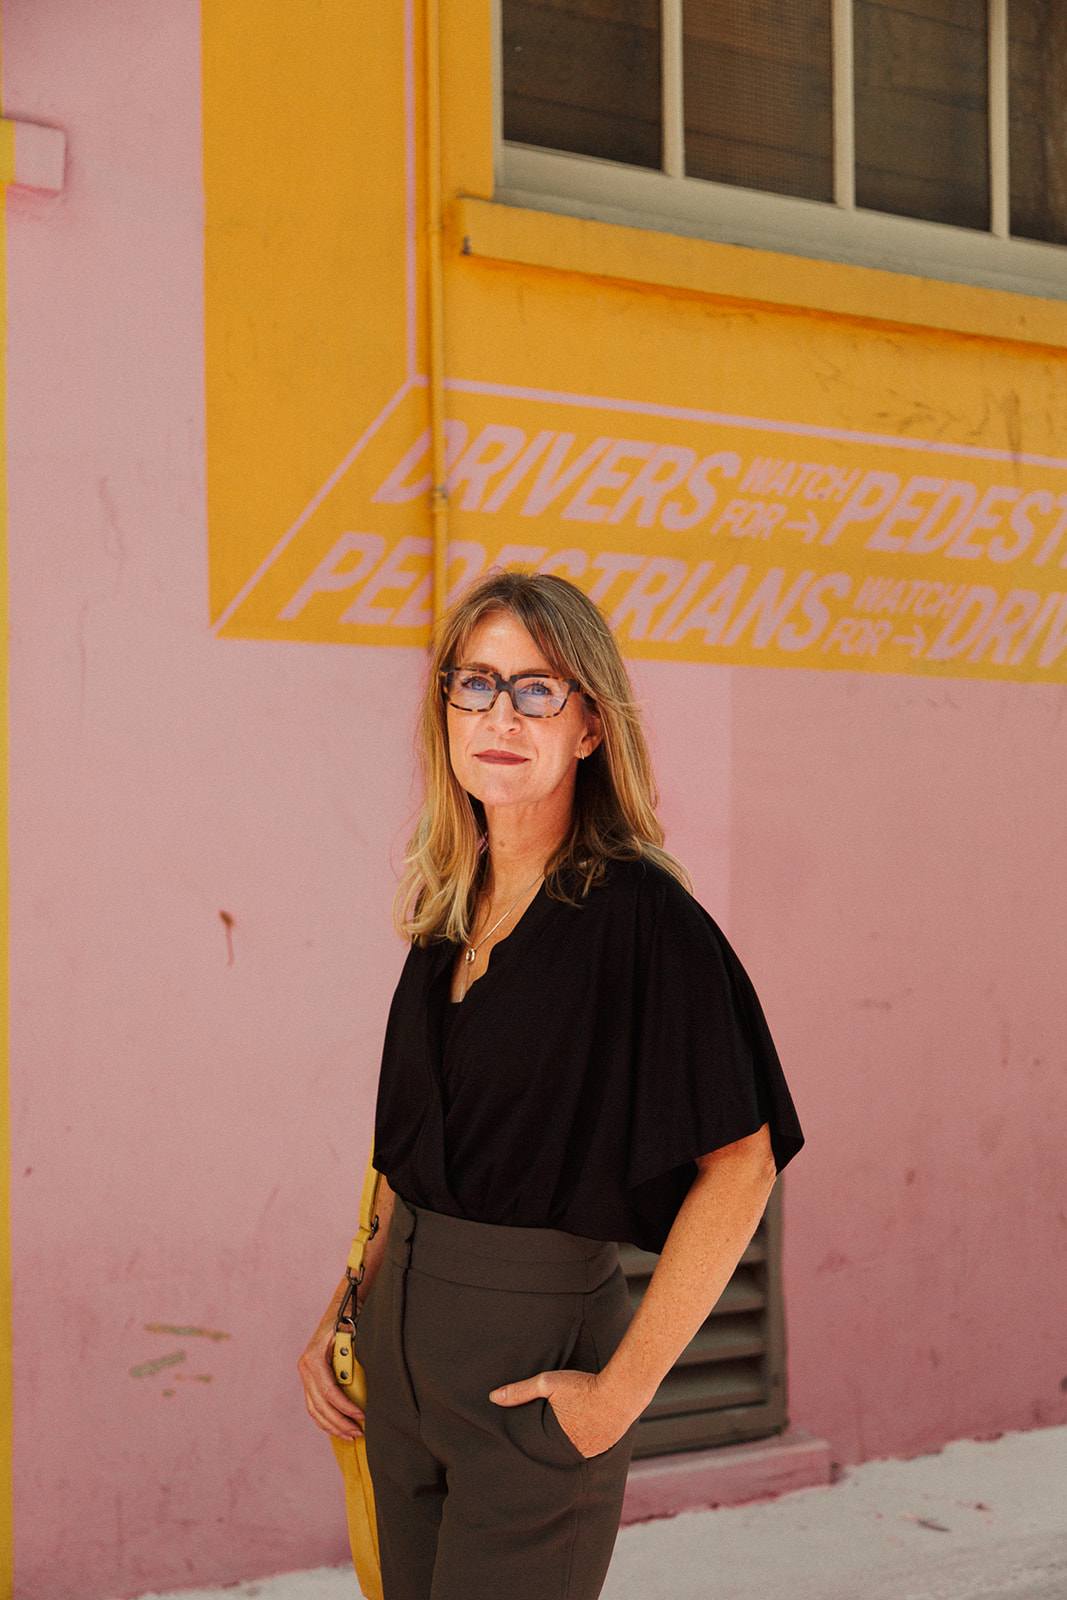 Portrait of Melissa Higgs. She stands in front of a pink and yellow painted wall (found within the Alley Oop laneway in downtown Vancouver).